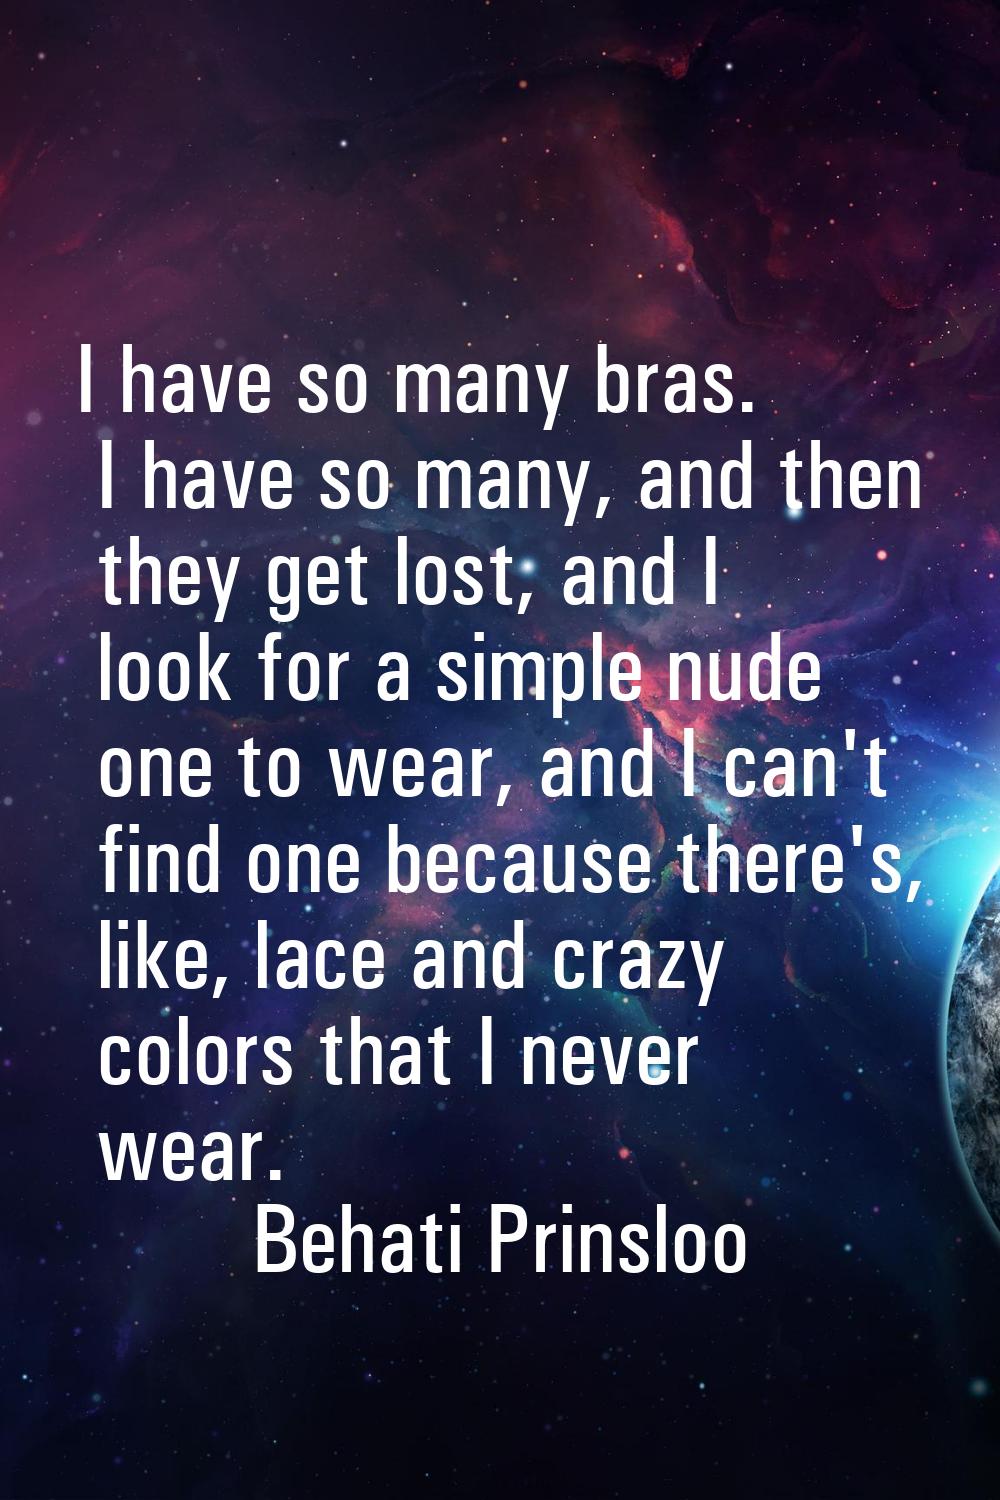 I have so many bras. I have so many, and then they get lost, and I look for a simple nude one to we